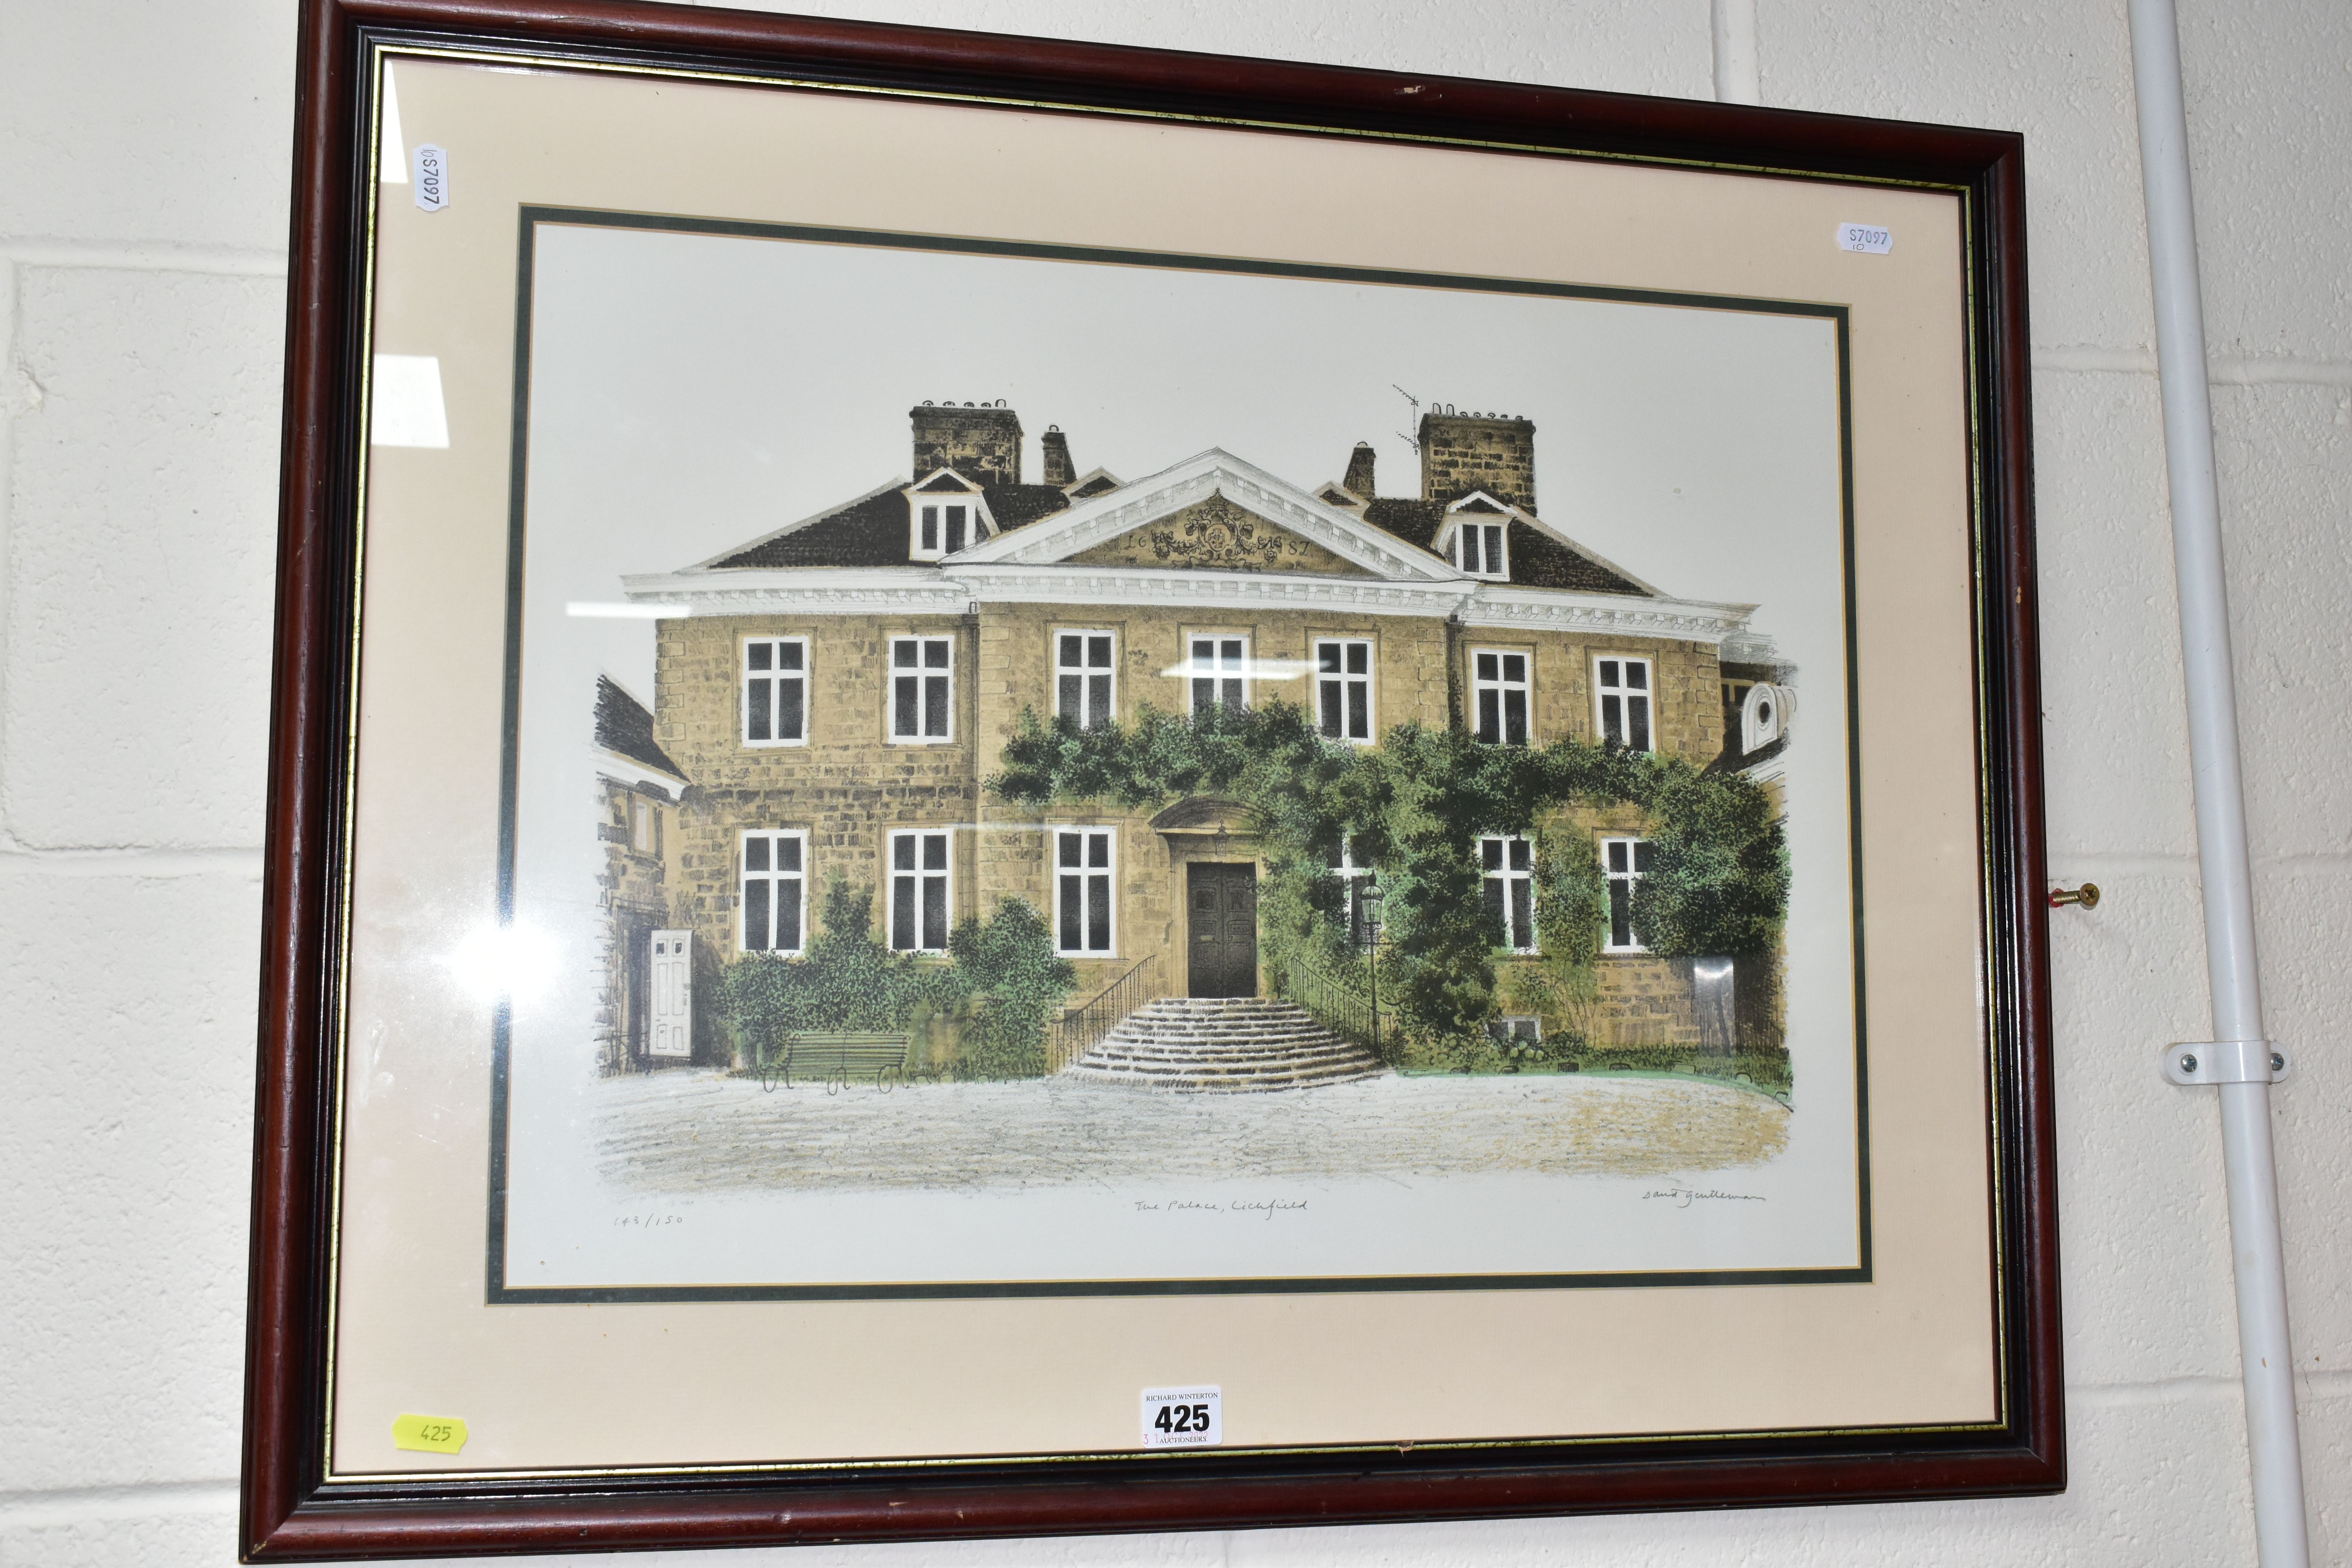 TWO LIMITED EDITION PRINTS BY DAVID GENTLEMAN, 'The Palace, Lichfield' pencil signed 143/150